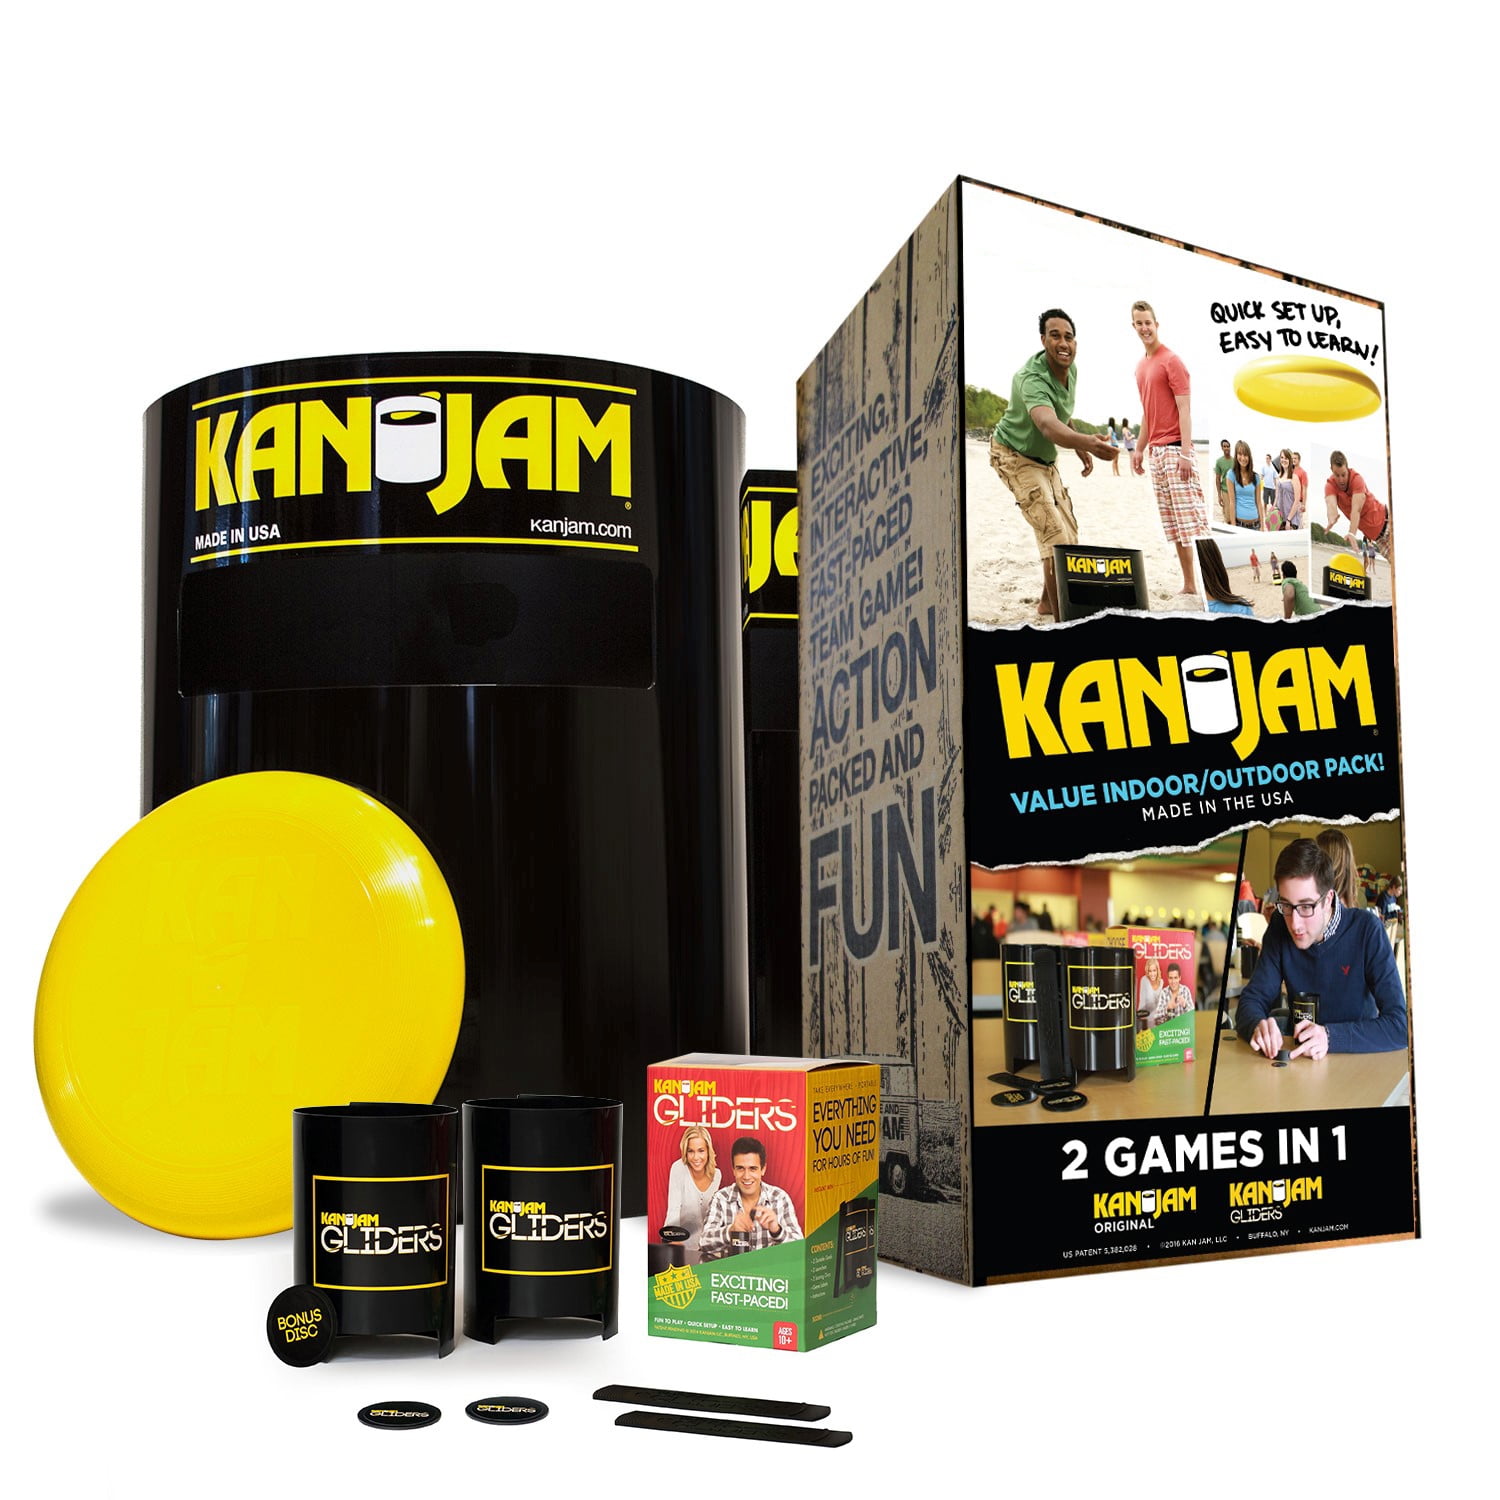 Kan Jam Tabletop Mini Disc Game Event Party Fun Great Gift 2 Games in 1 for sale online 